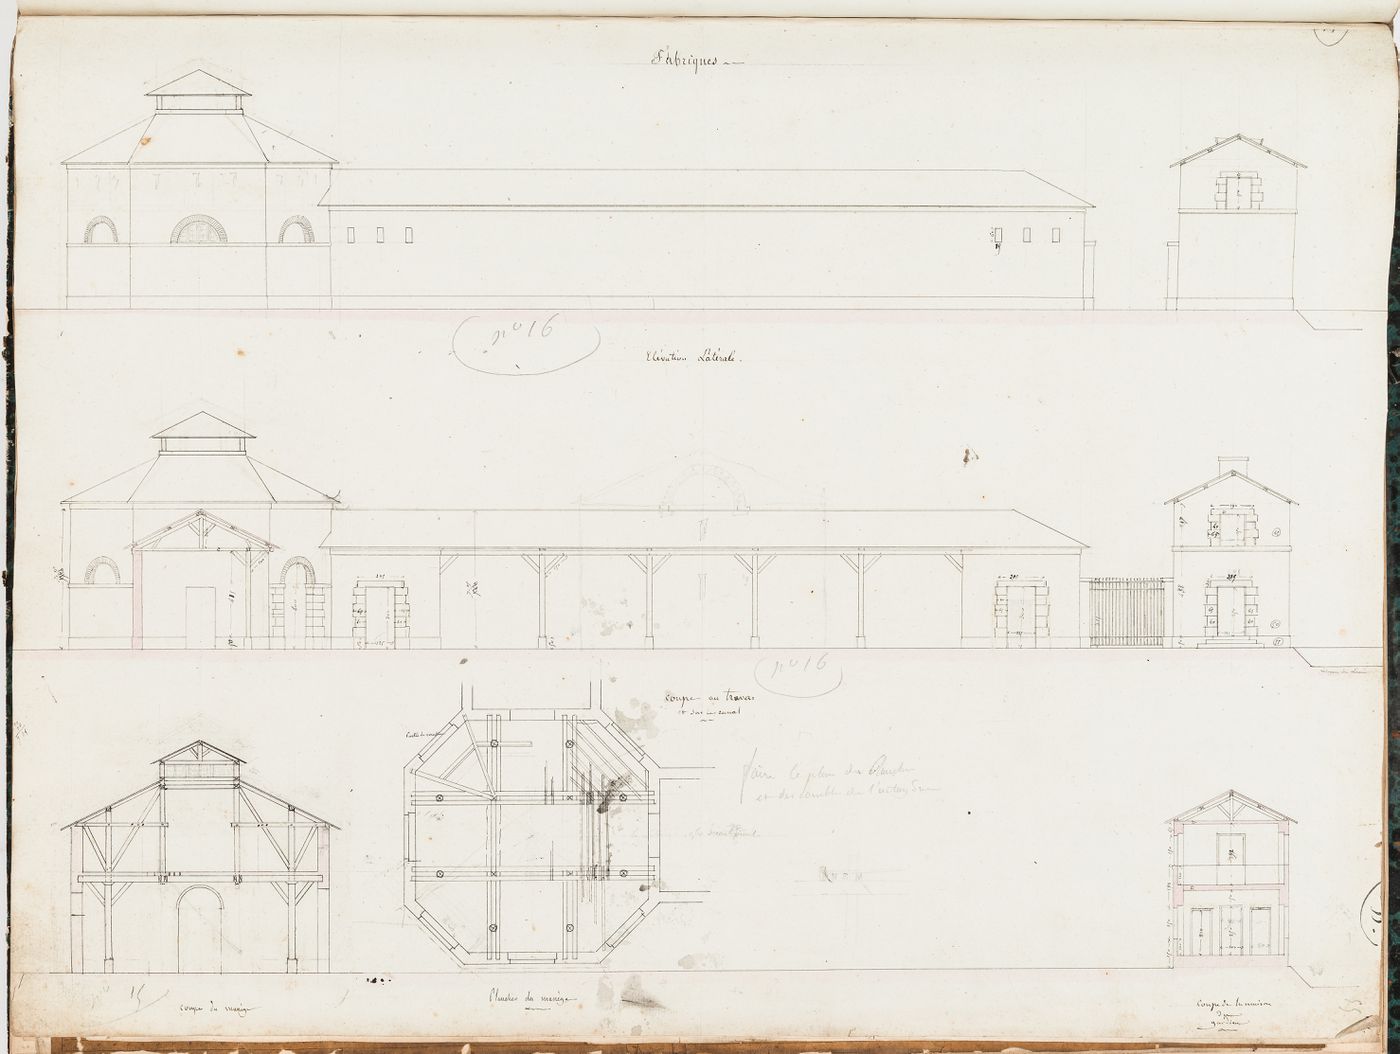 Project for Clos d'équarrissage, fôret de Bondy: Elevations, sections, and framing plan for the factory for the preservation of muscles, and a manège